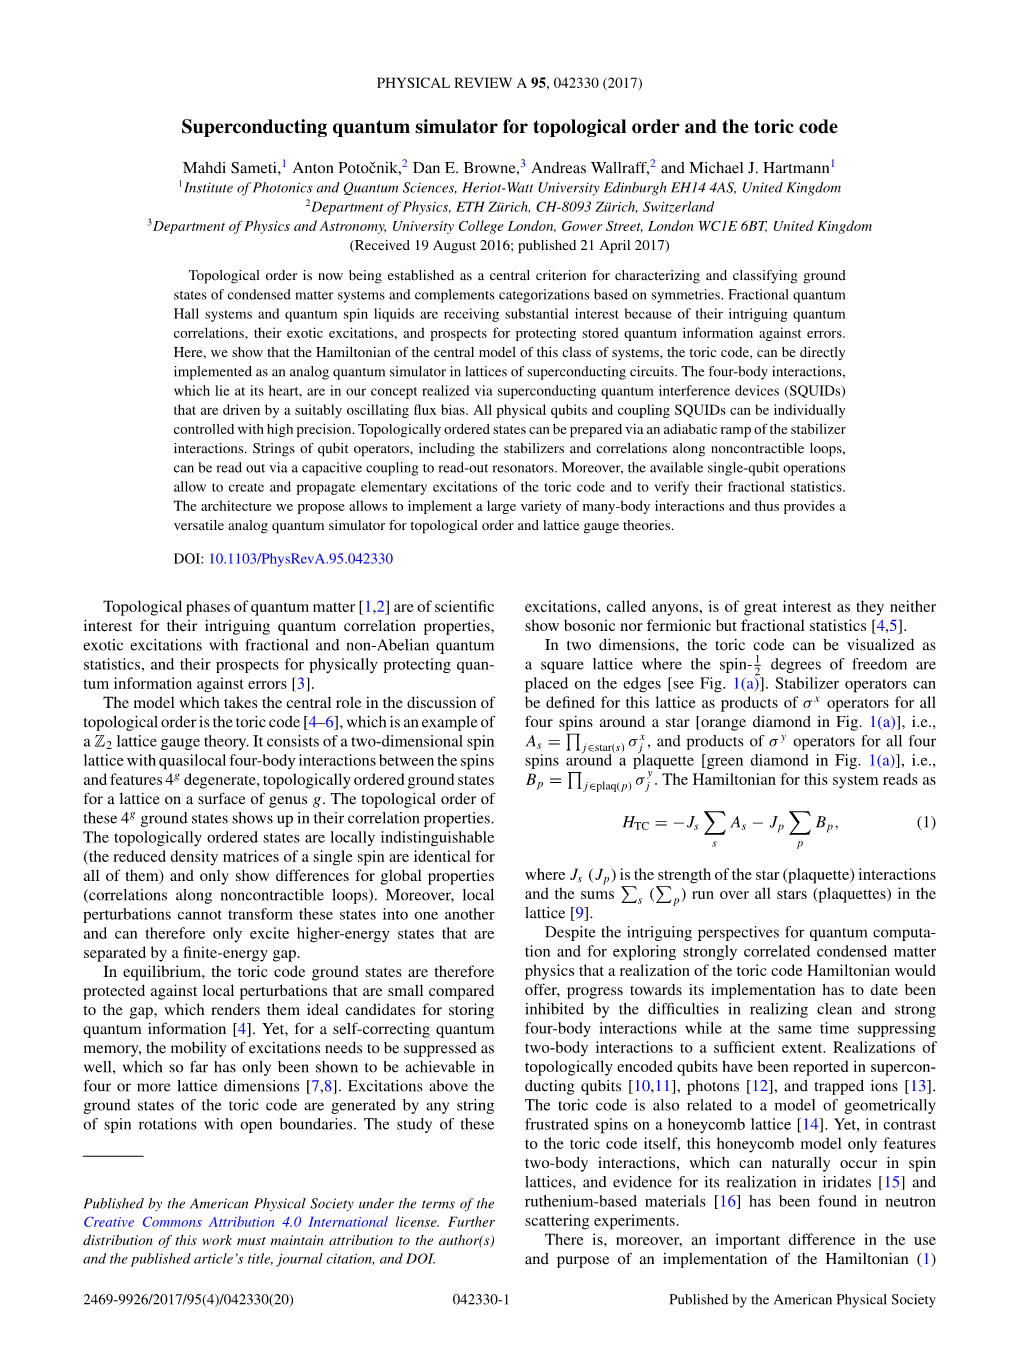 Superconducting Quantum Simulator for Topological Order and the Toric Code